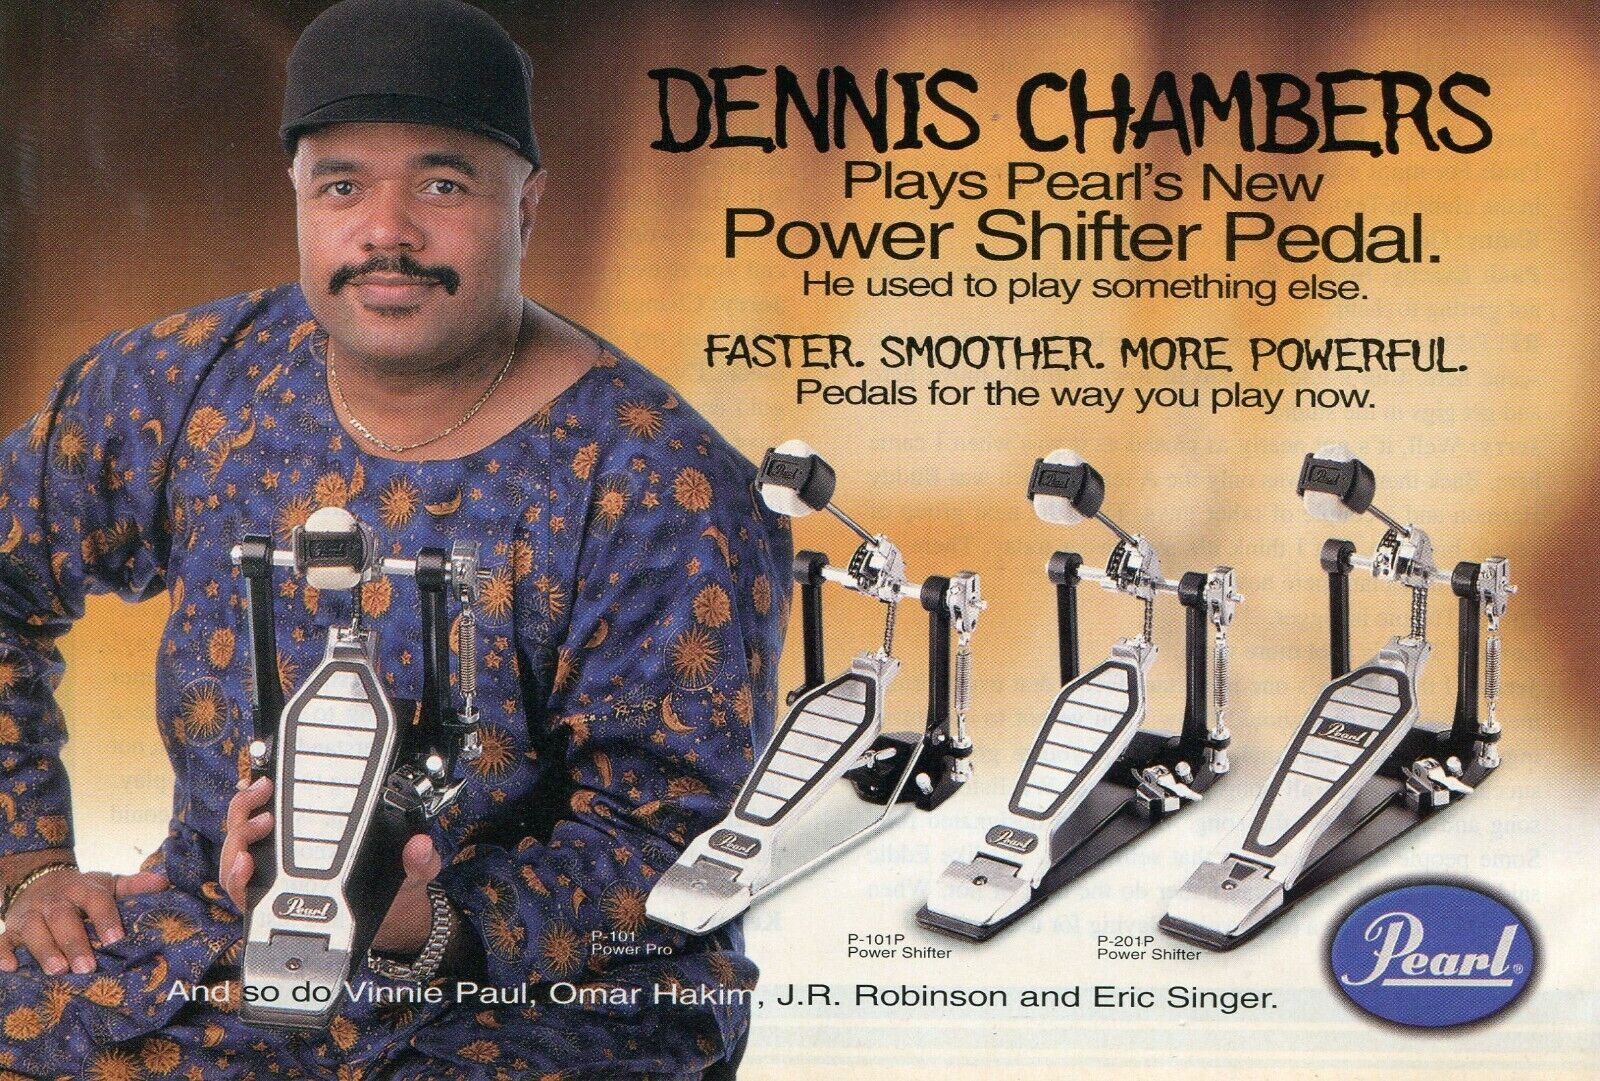 1996 small Print Ad of Pearl Power Shifter Drum Pedal w Dennis Chambers